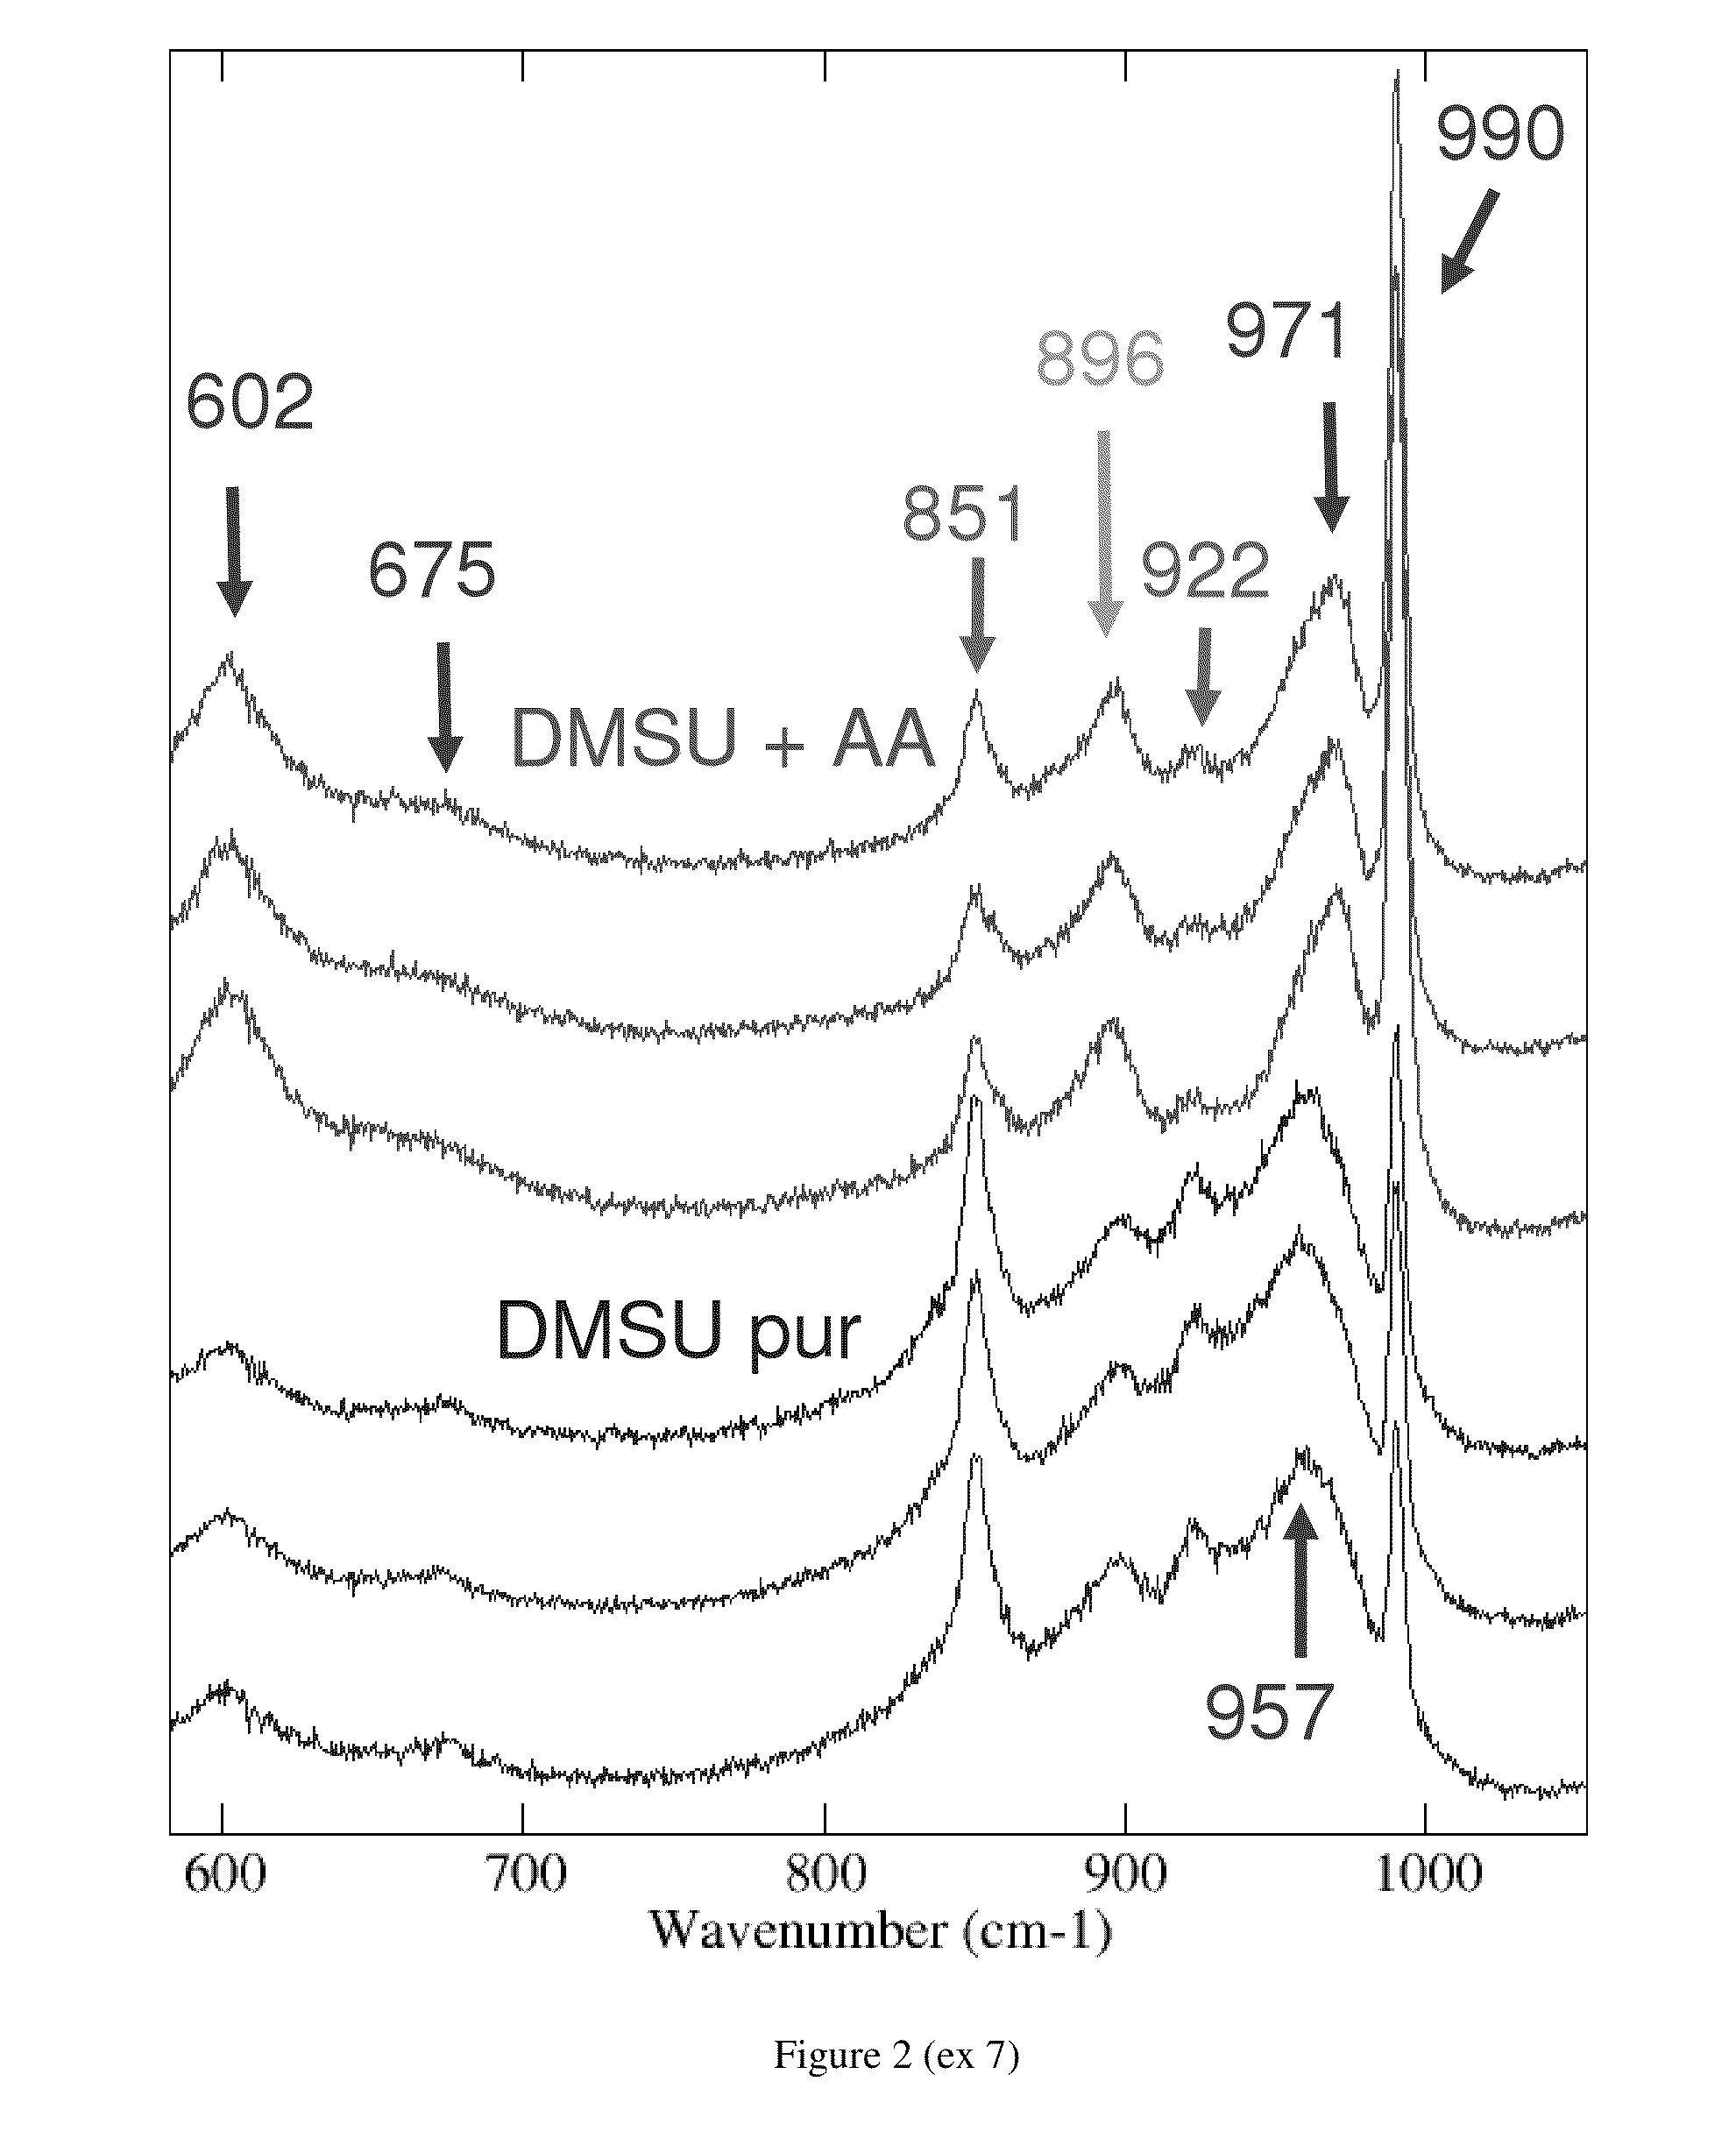 Catalyst that can be used in hydrotreatment, comprising metals of groups viii and VIB, and preparation with acetic acid and dialkyl succinate c1-c4